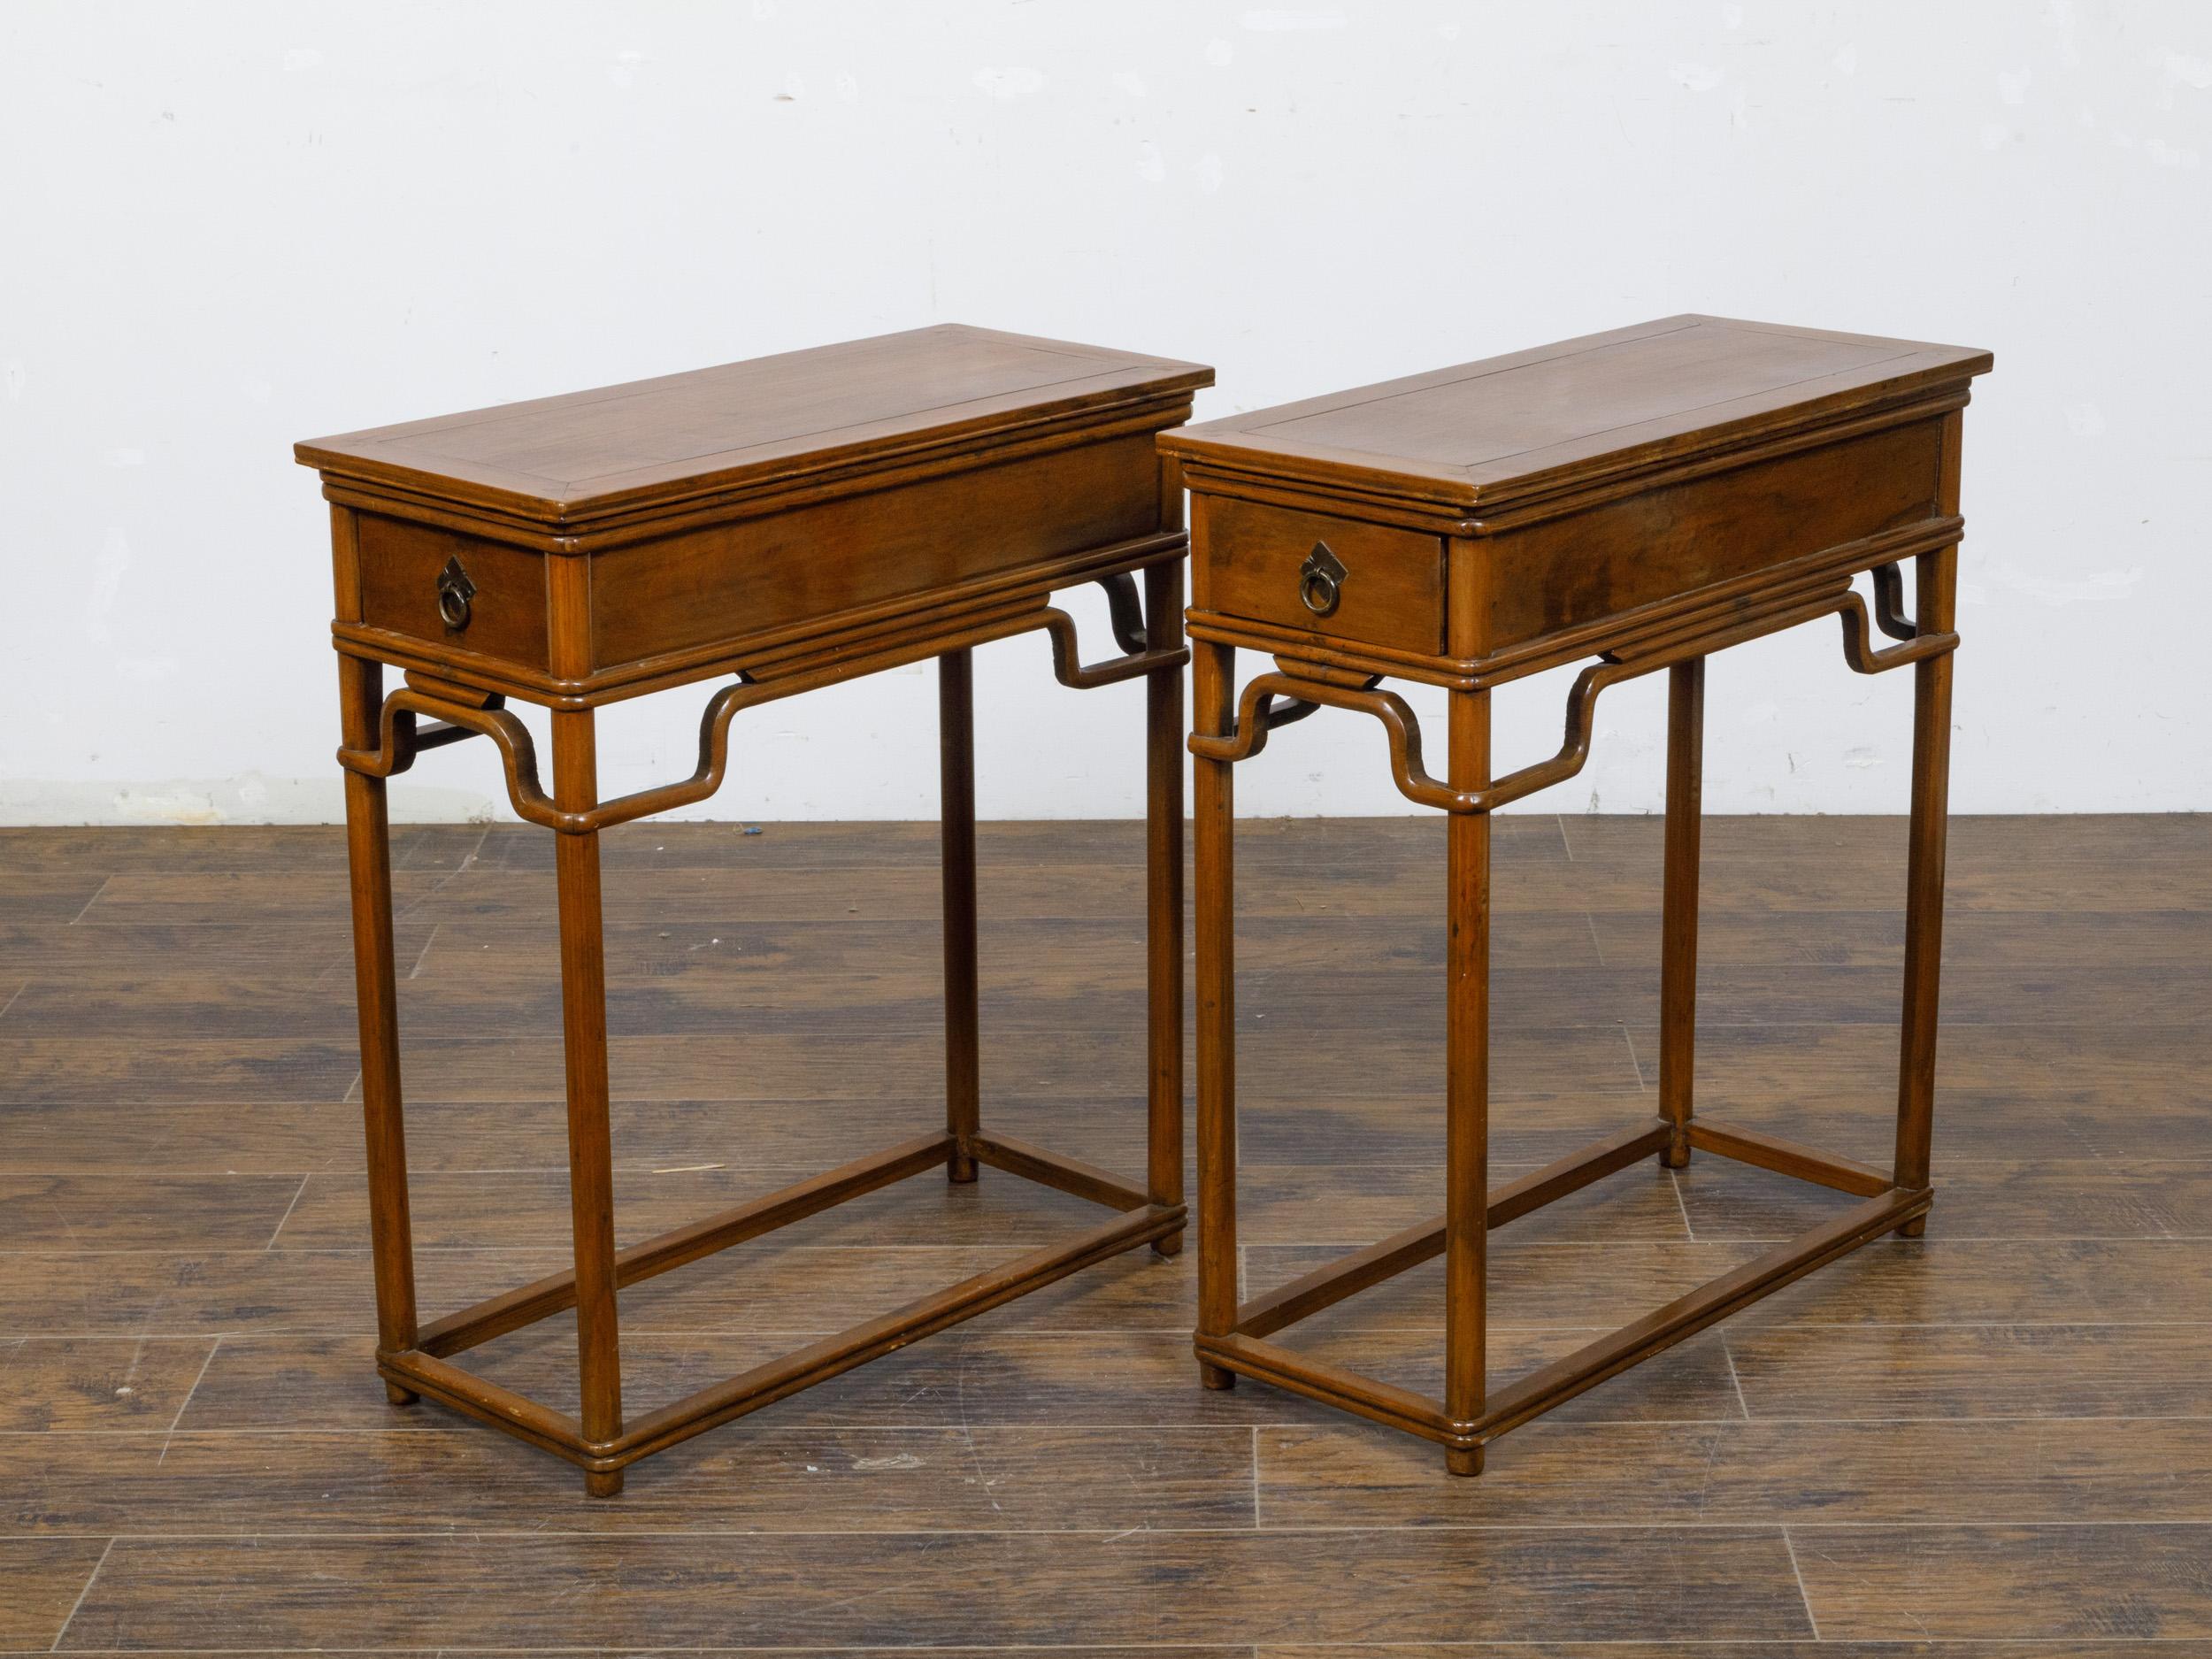 Pair of Teak 19th Century Console Tables with Drawers and Humpback Stretchers For Sale 1